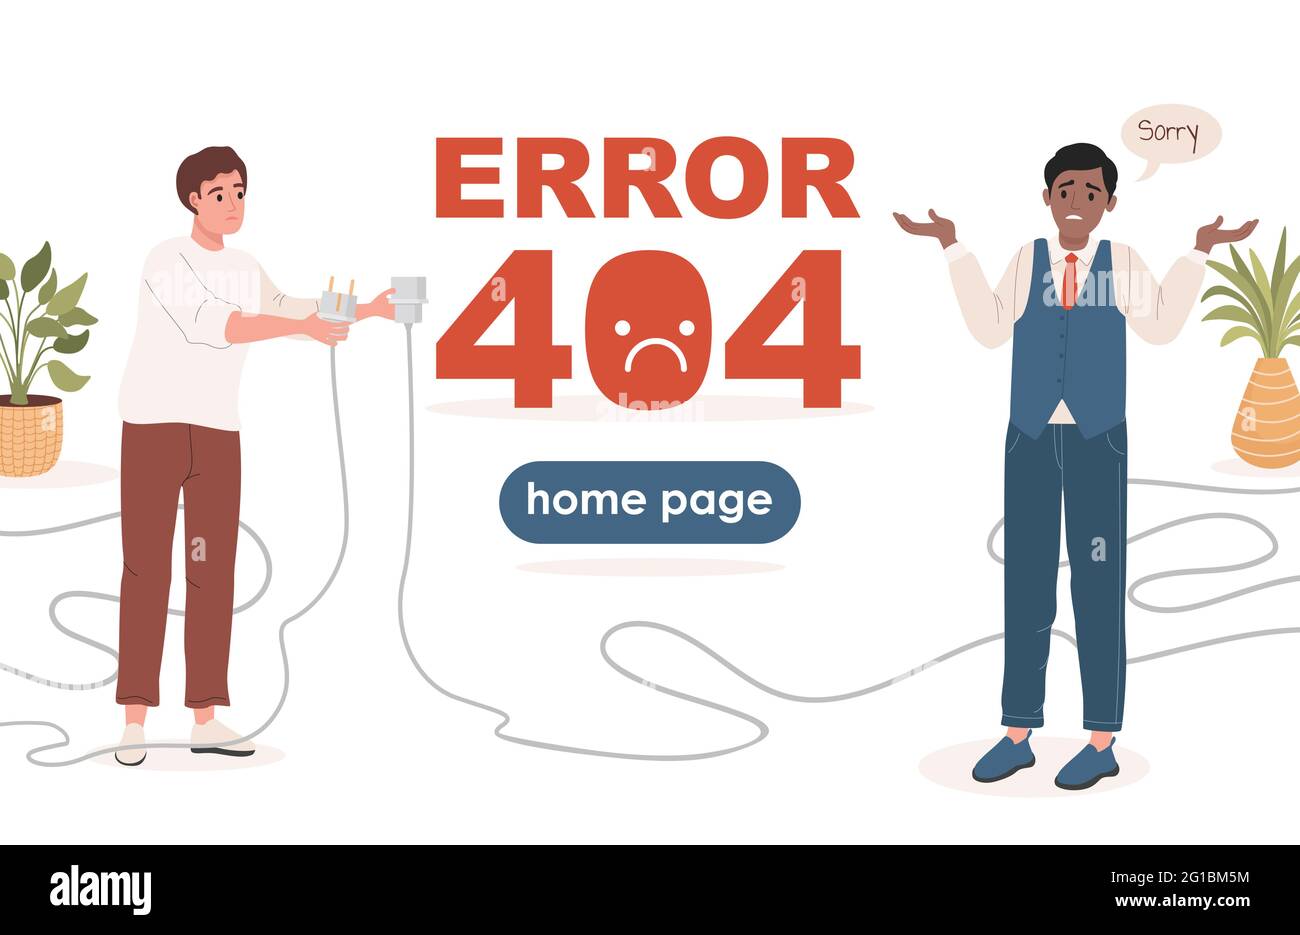 Error 404 landing page vector flat template with text space. Man holding unplugged cable, another man saying sorry. Confuse and disappointed male characters. Page not found website concept. Stock Vector